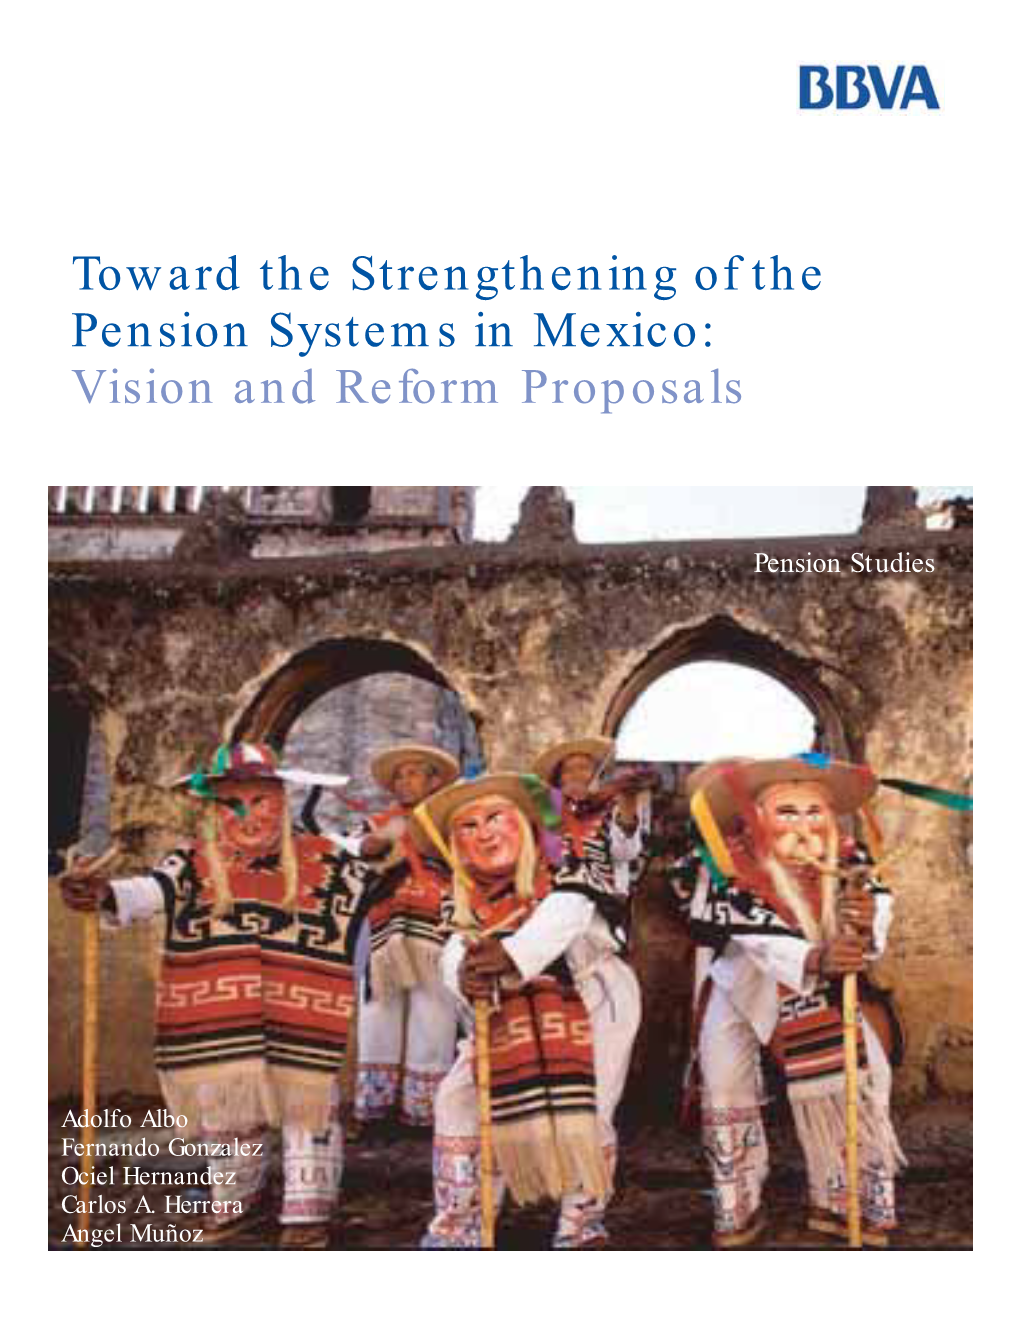 Toward the Strengthening of the Pension Systems in Mexico: Vision and Reform Proposals